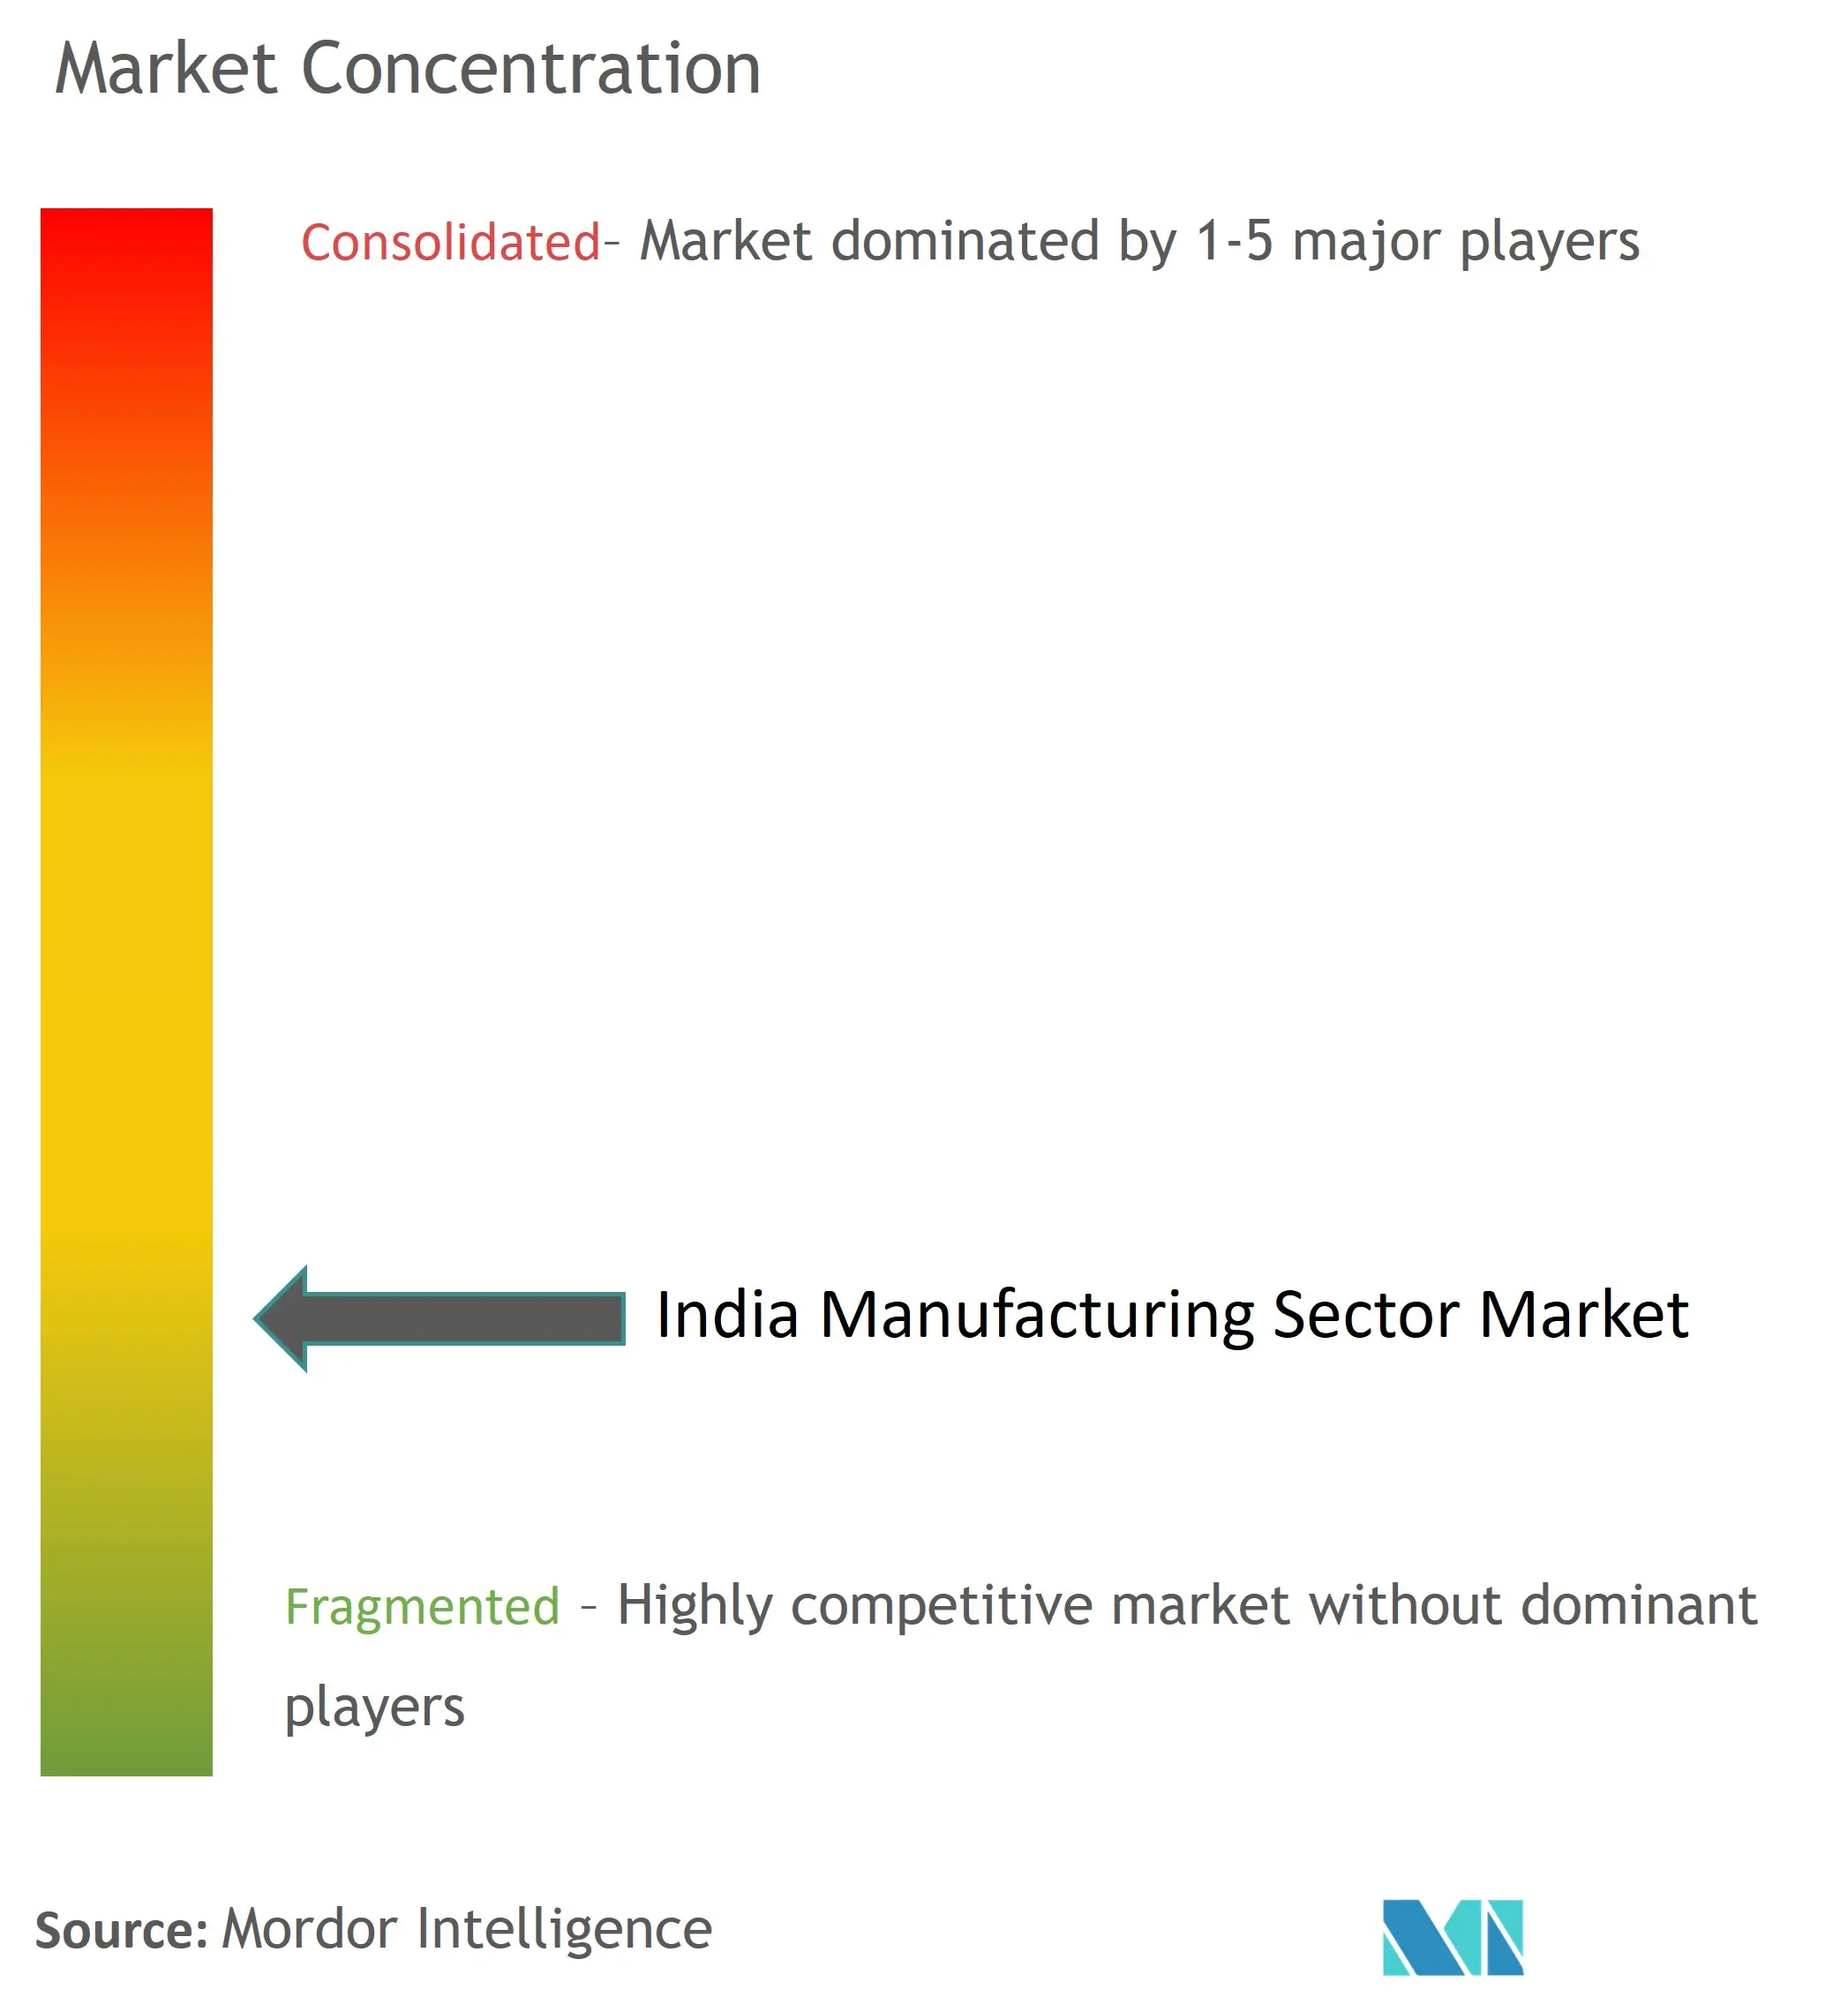 India Manufacturing Market Concentration